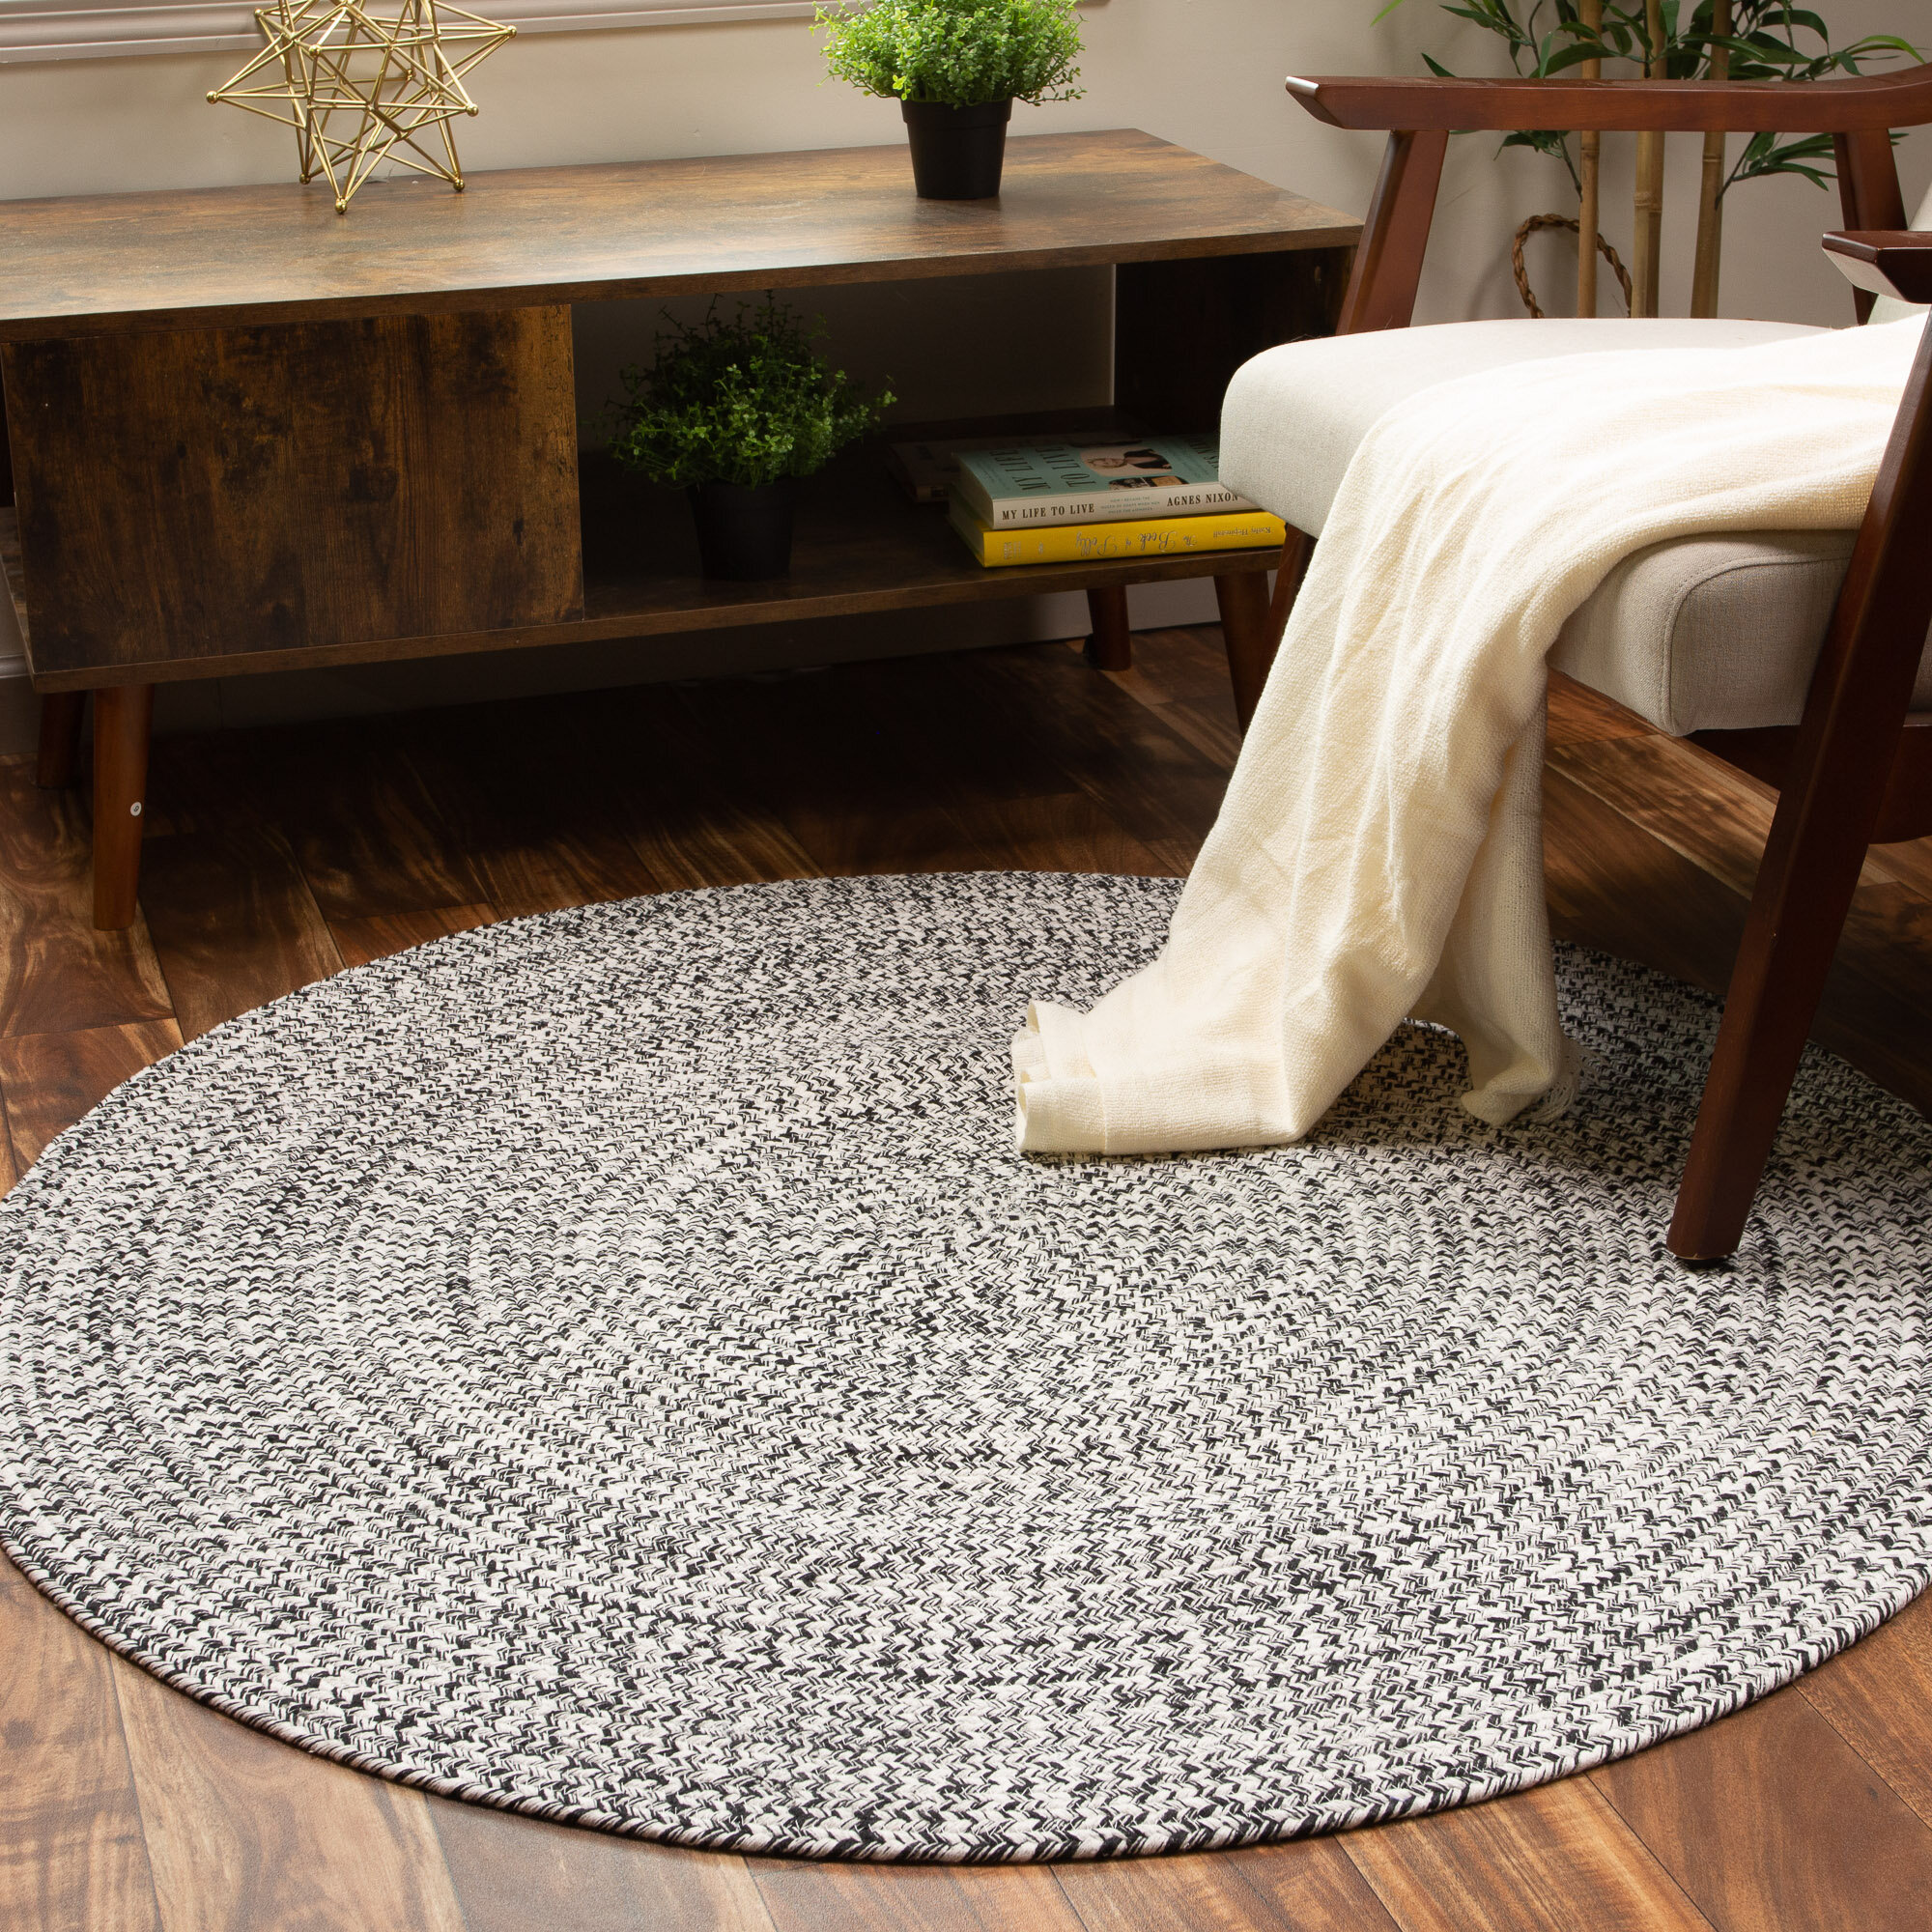  SUPERIOR Hand-Braided Wool Indoor Large Area Rug, Rustic  Style, Home Floor Decor for Living Room, Kitchen, Dining, Bedroom, Dorm,  Office, Nursery, Cotton Backing, Aero Collection, Black, 5' x 8' 